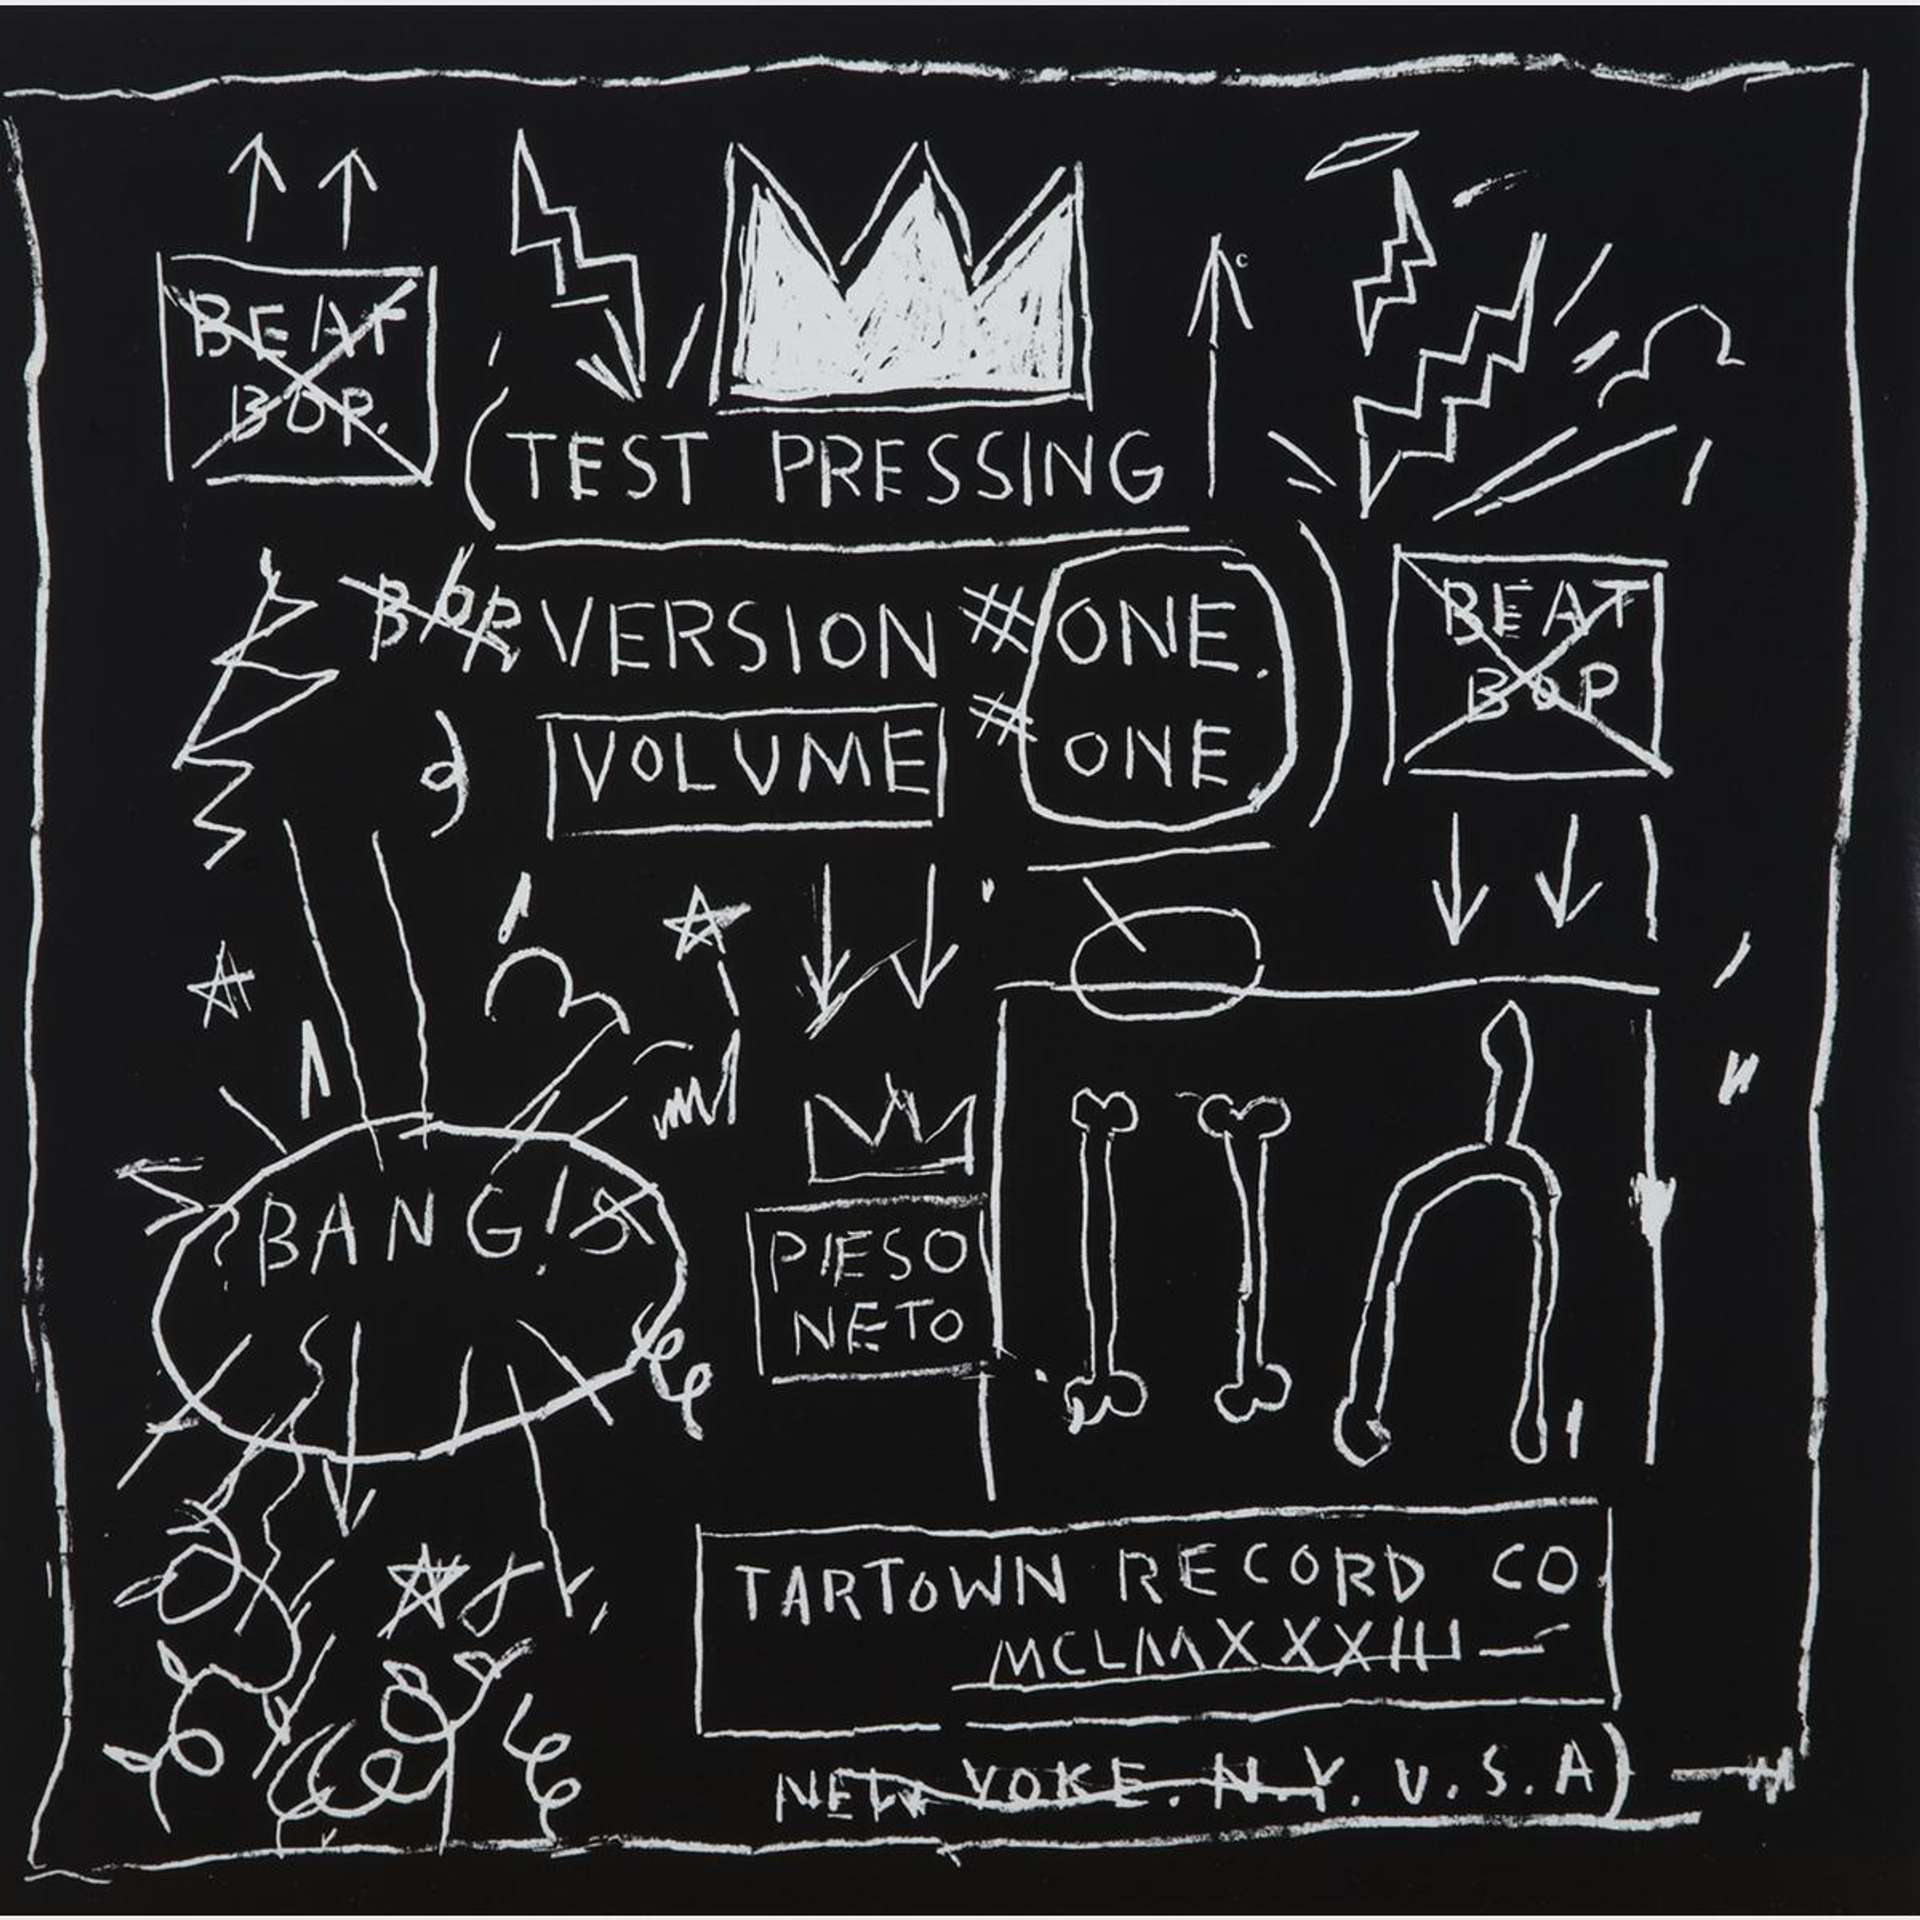 An image of the album cover for Beat Bop, designed by artist Jean-Michel Basquiat. It is a black and white drawing that includes his crown motif, rough sketches of bones, an explosion with the word "bang!", lightning bolts and Roman numerals.